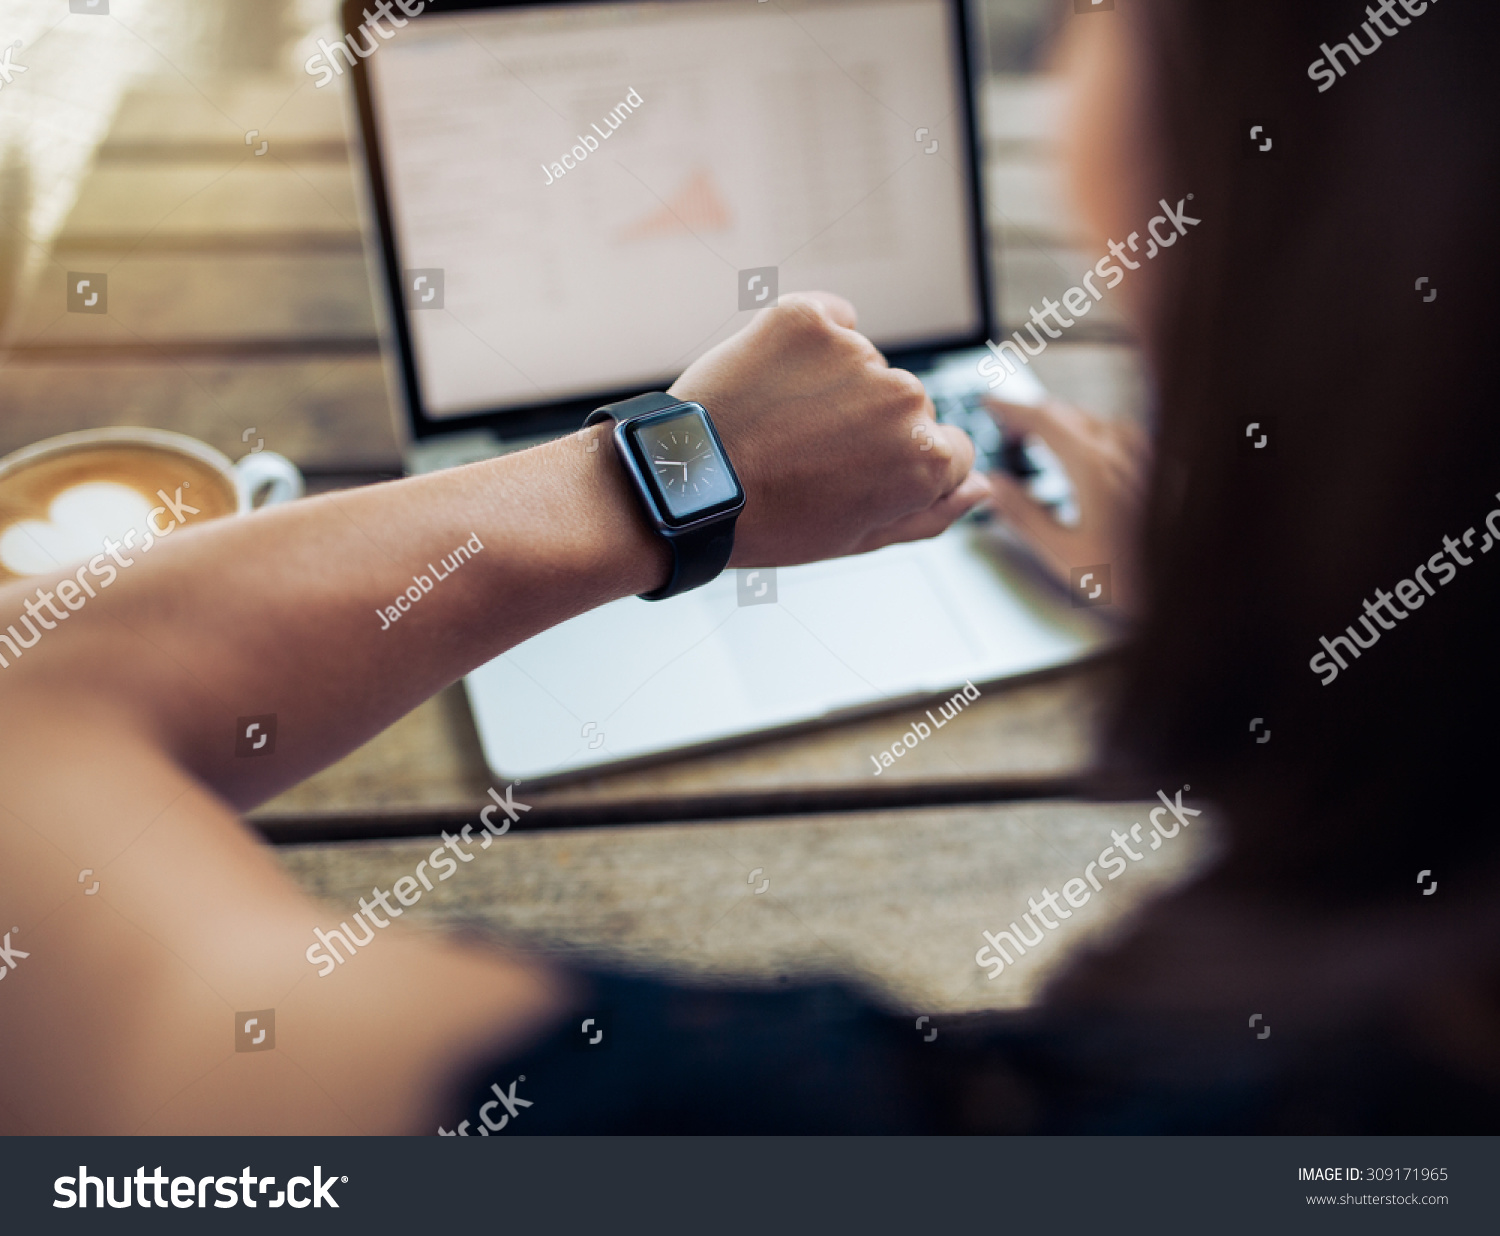 Close up shot of a woman checking time on her smartwatch. Female sitting in cafe with a laptop and cup of coffee. #309171965